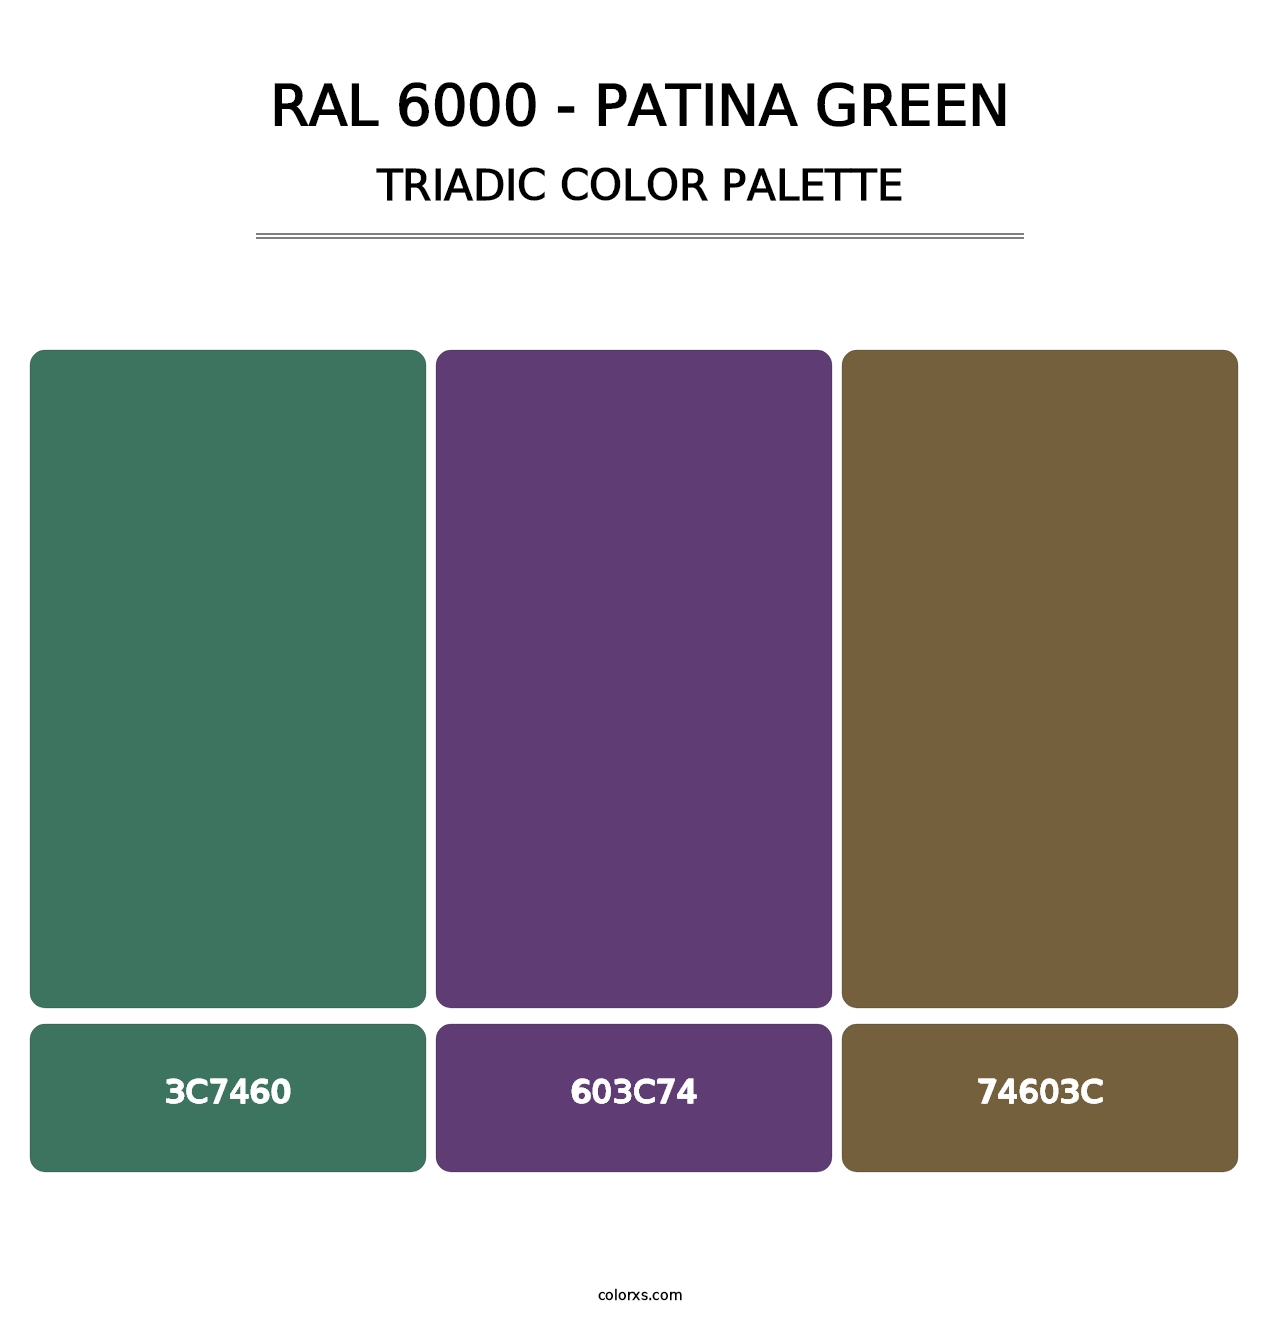 RAL 6000 - Patina Green - Triadic Color Palette